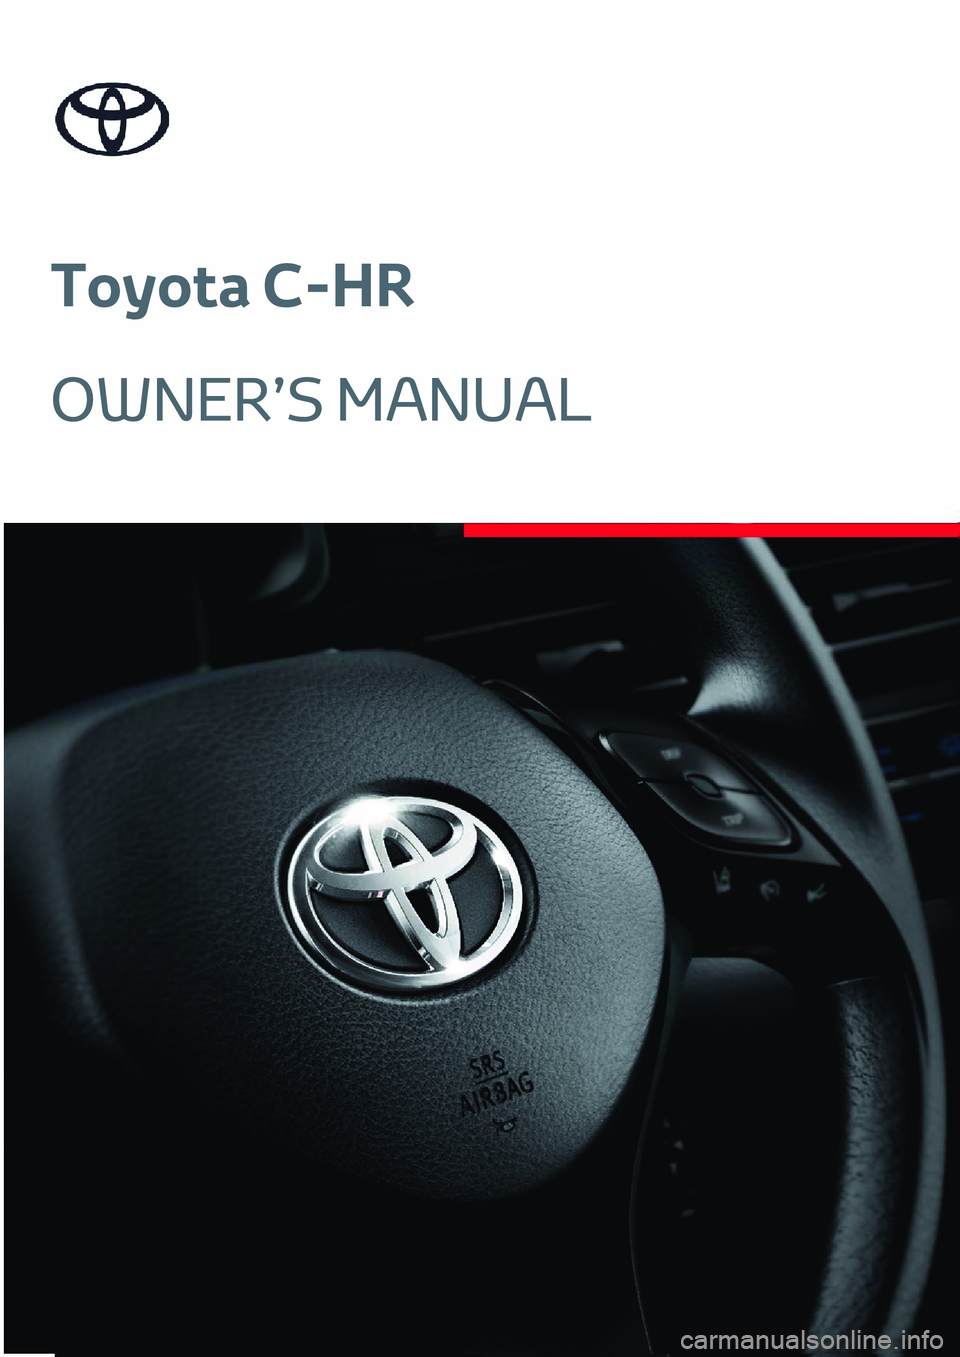 TOYOTA C-HR 2023  Manuel du propriétaire (in French) Toyota C-HR
OWNER’S MANUAL 